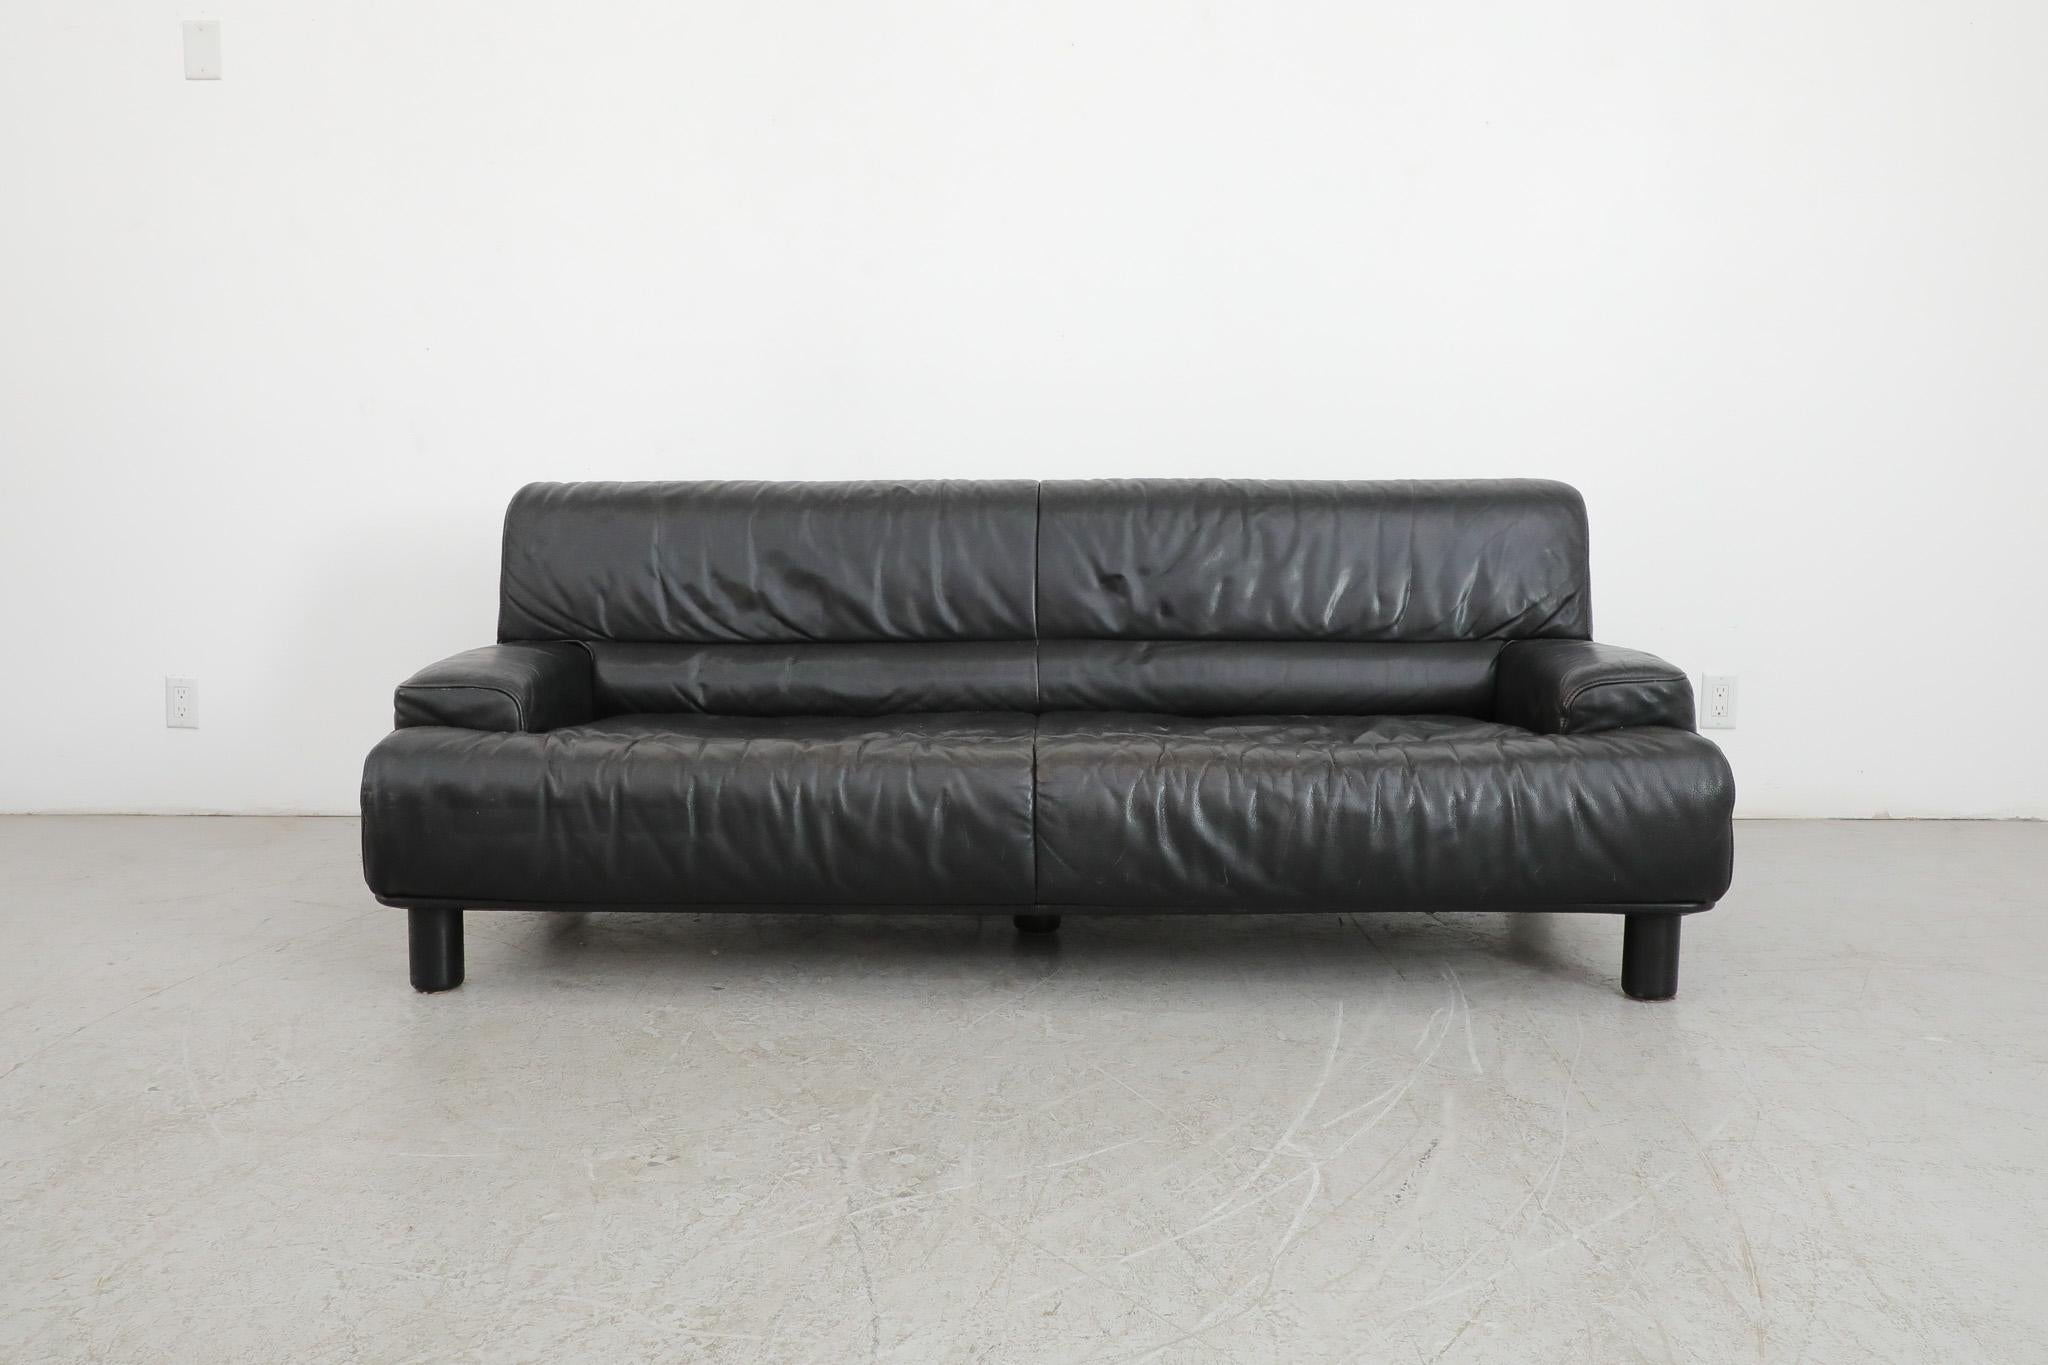 Mid-Century 'DS-18' black leather sofa with black wood legs by iconic Swiss leather furniture manufacturer De Sede. Plush, generously sized 3 seater sofa perfect for  high comfort lounging. In original condition with some visible wear and scratching